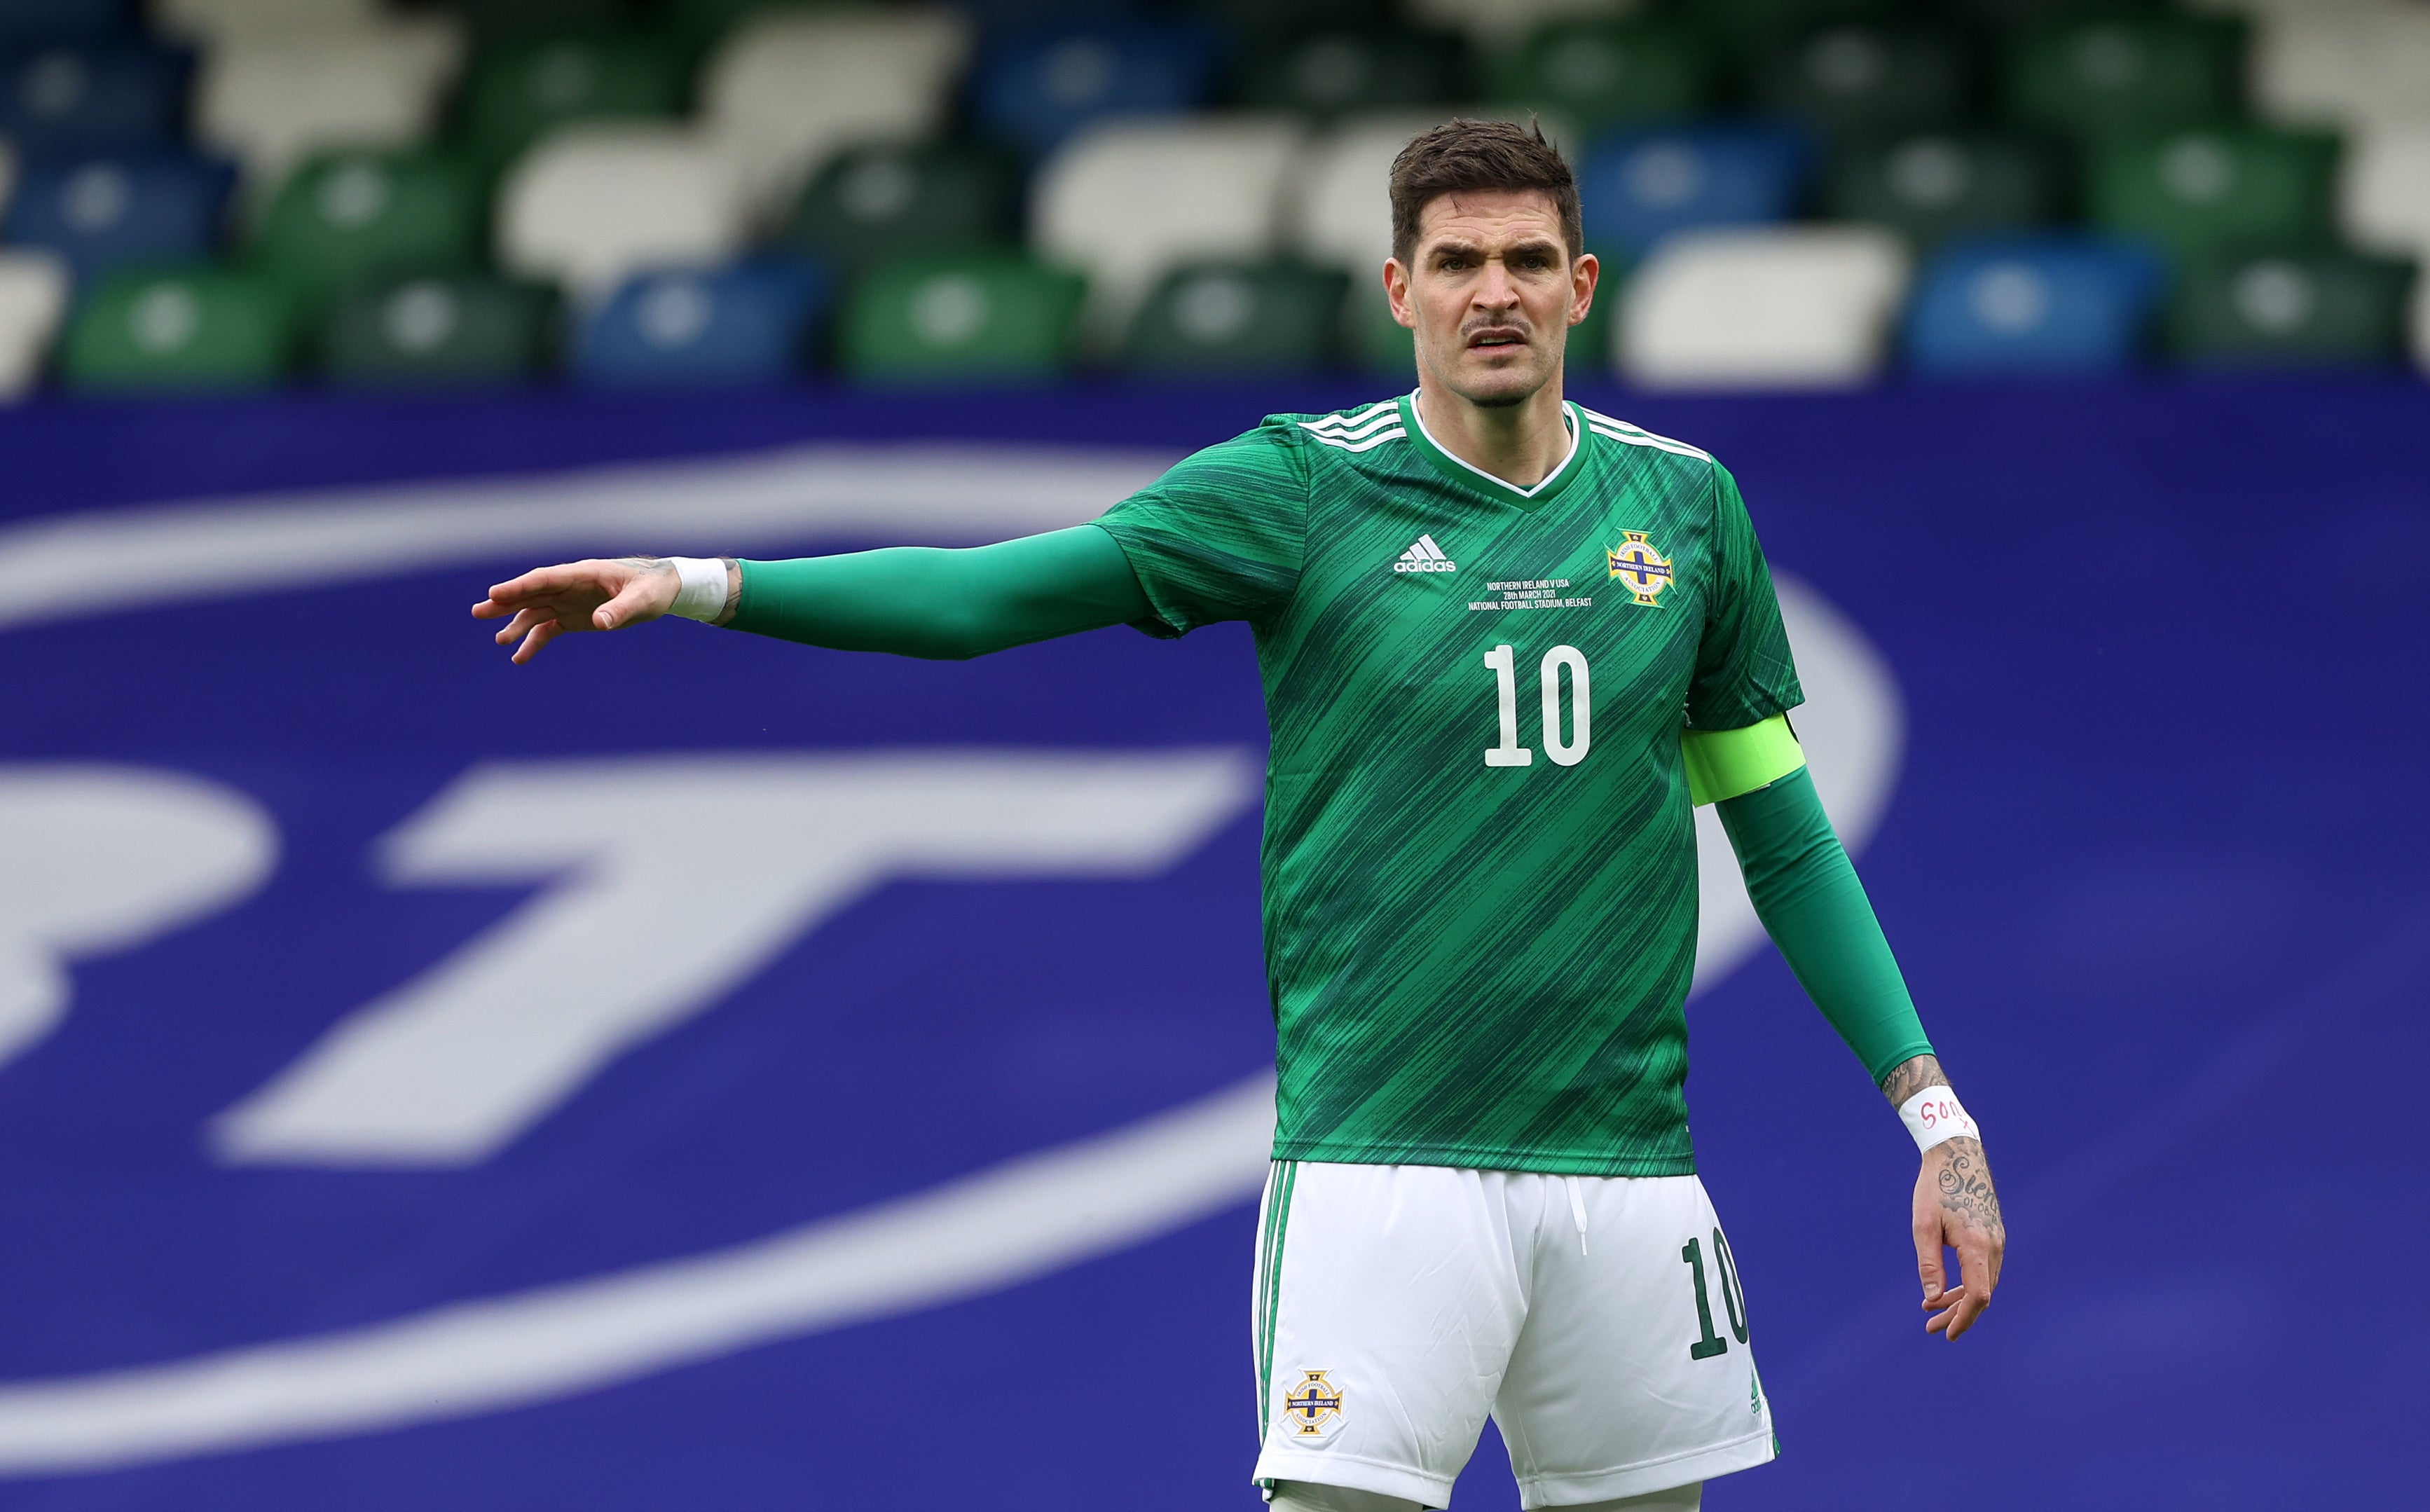 Kyle Lafferty has been sent home from Northern Ireland’s squad ahead of the Nations League match against Kosovo (Liam McBurney/PA)